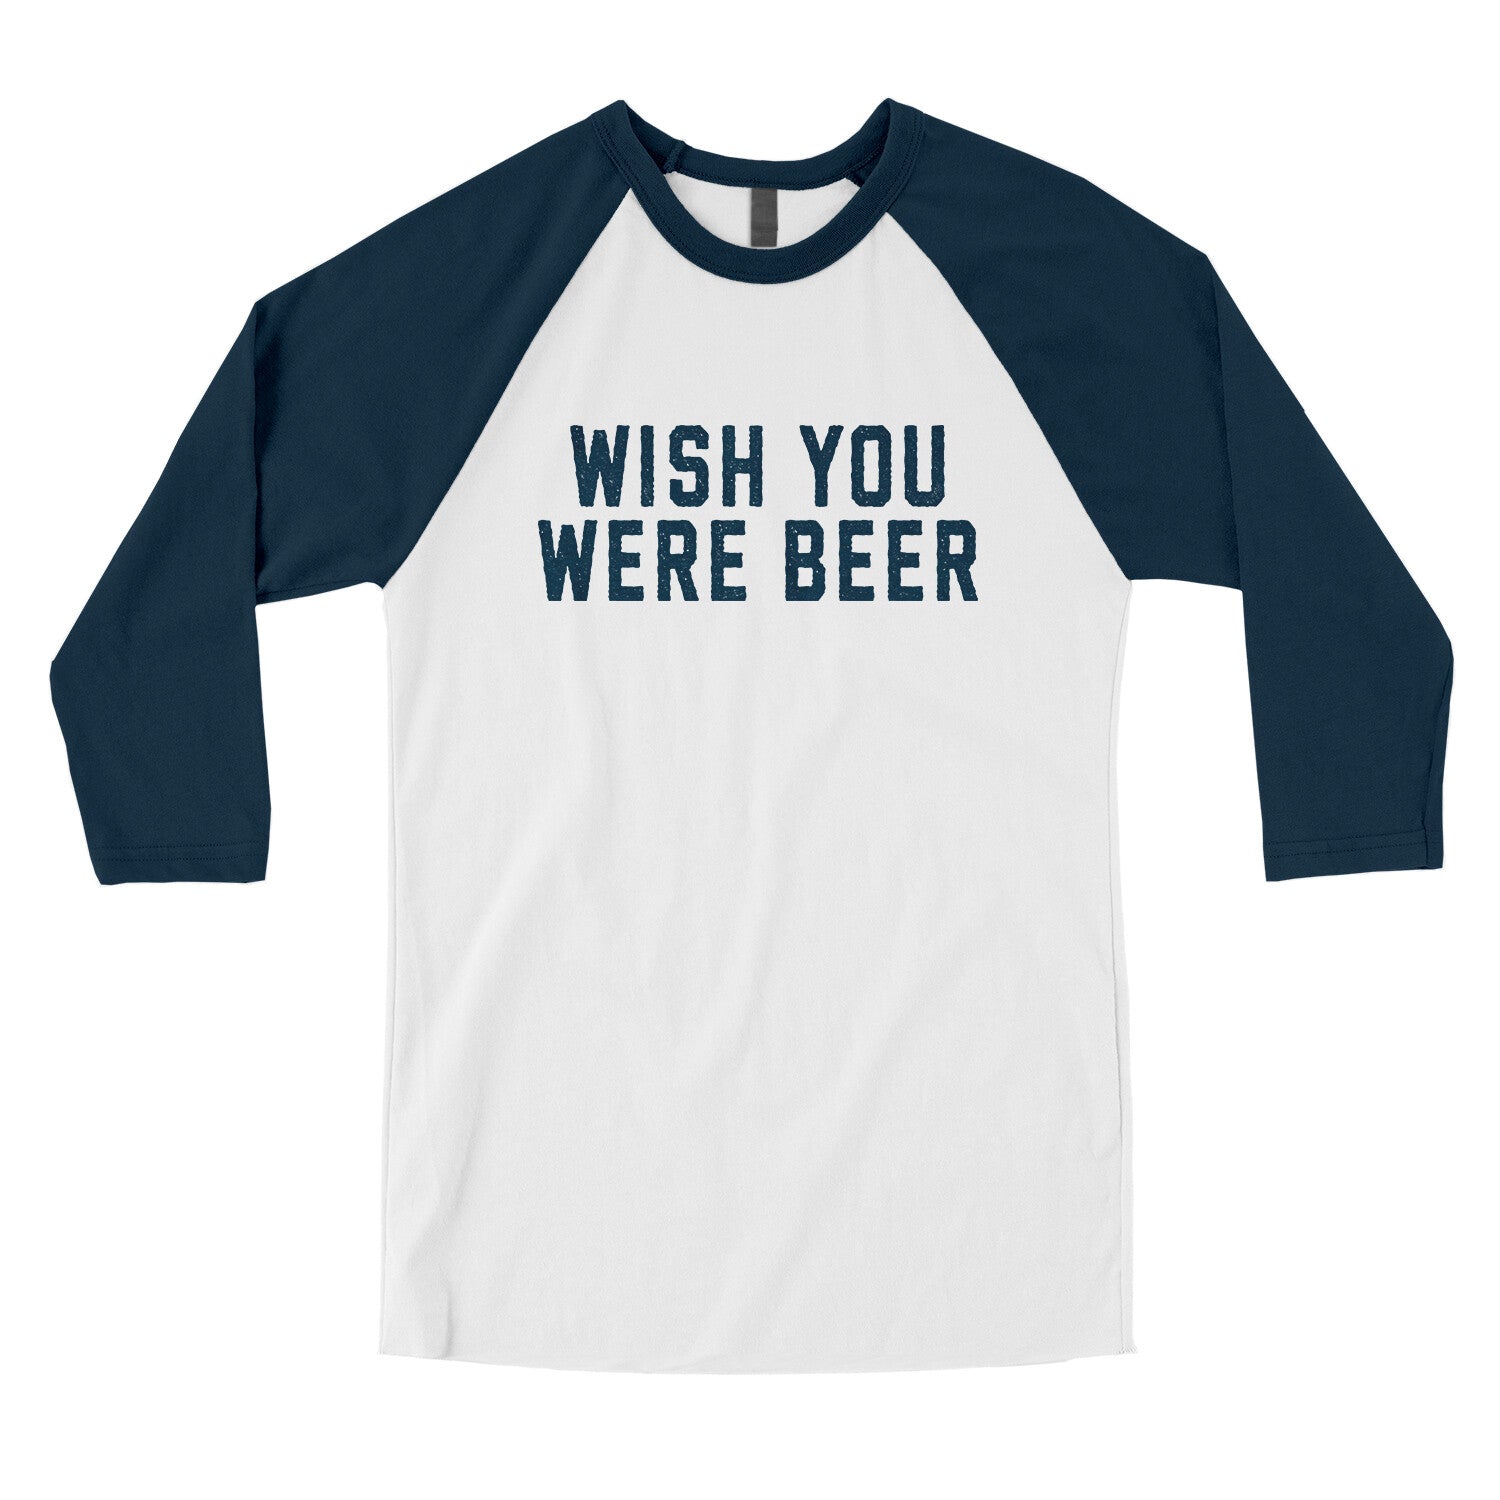 Wish You Were Beer in White with Navy Color